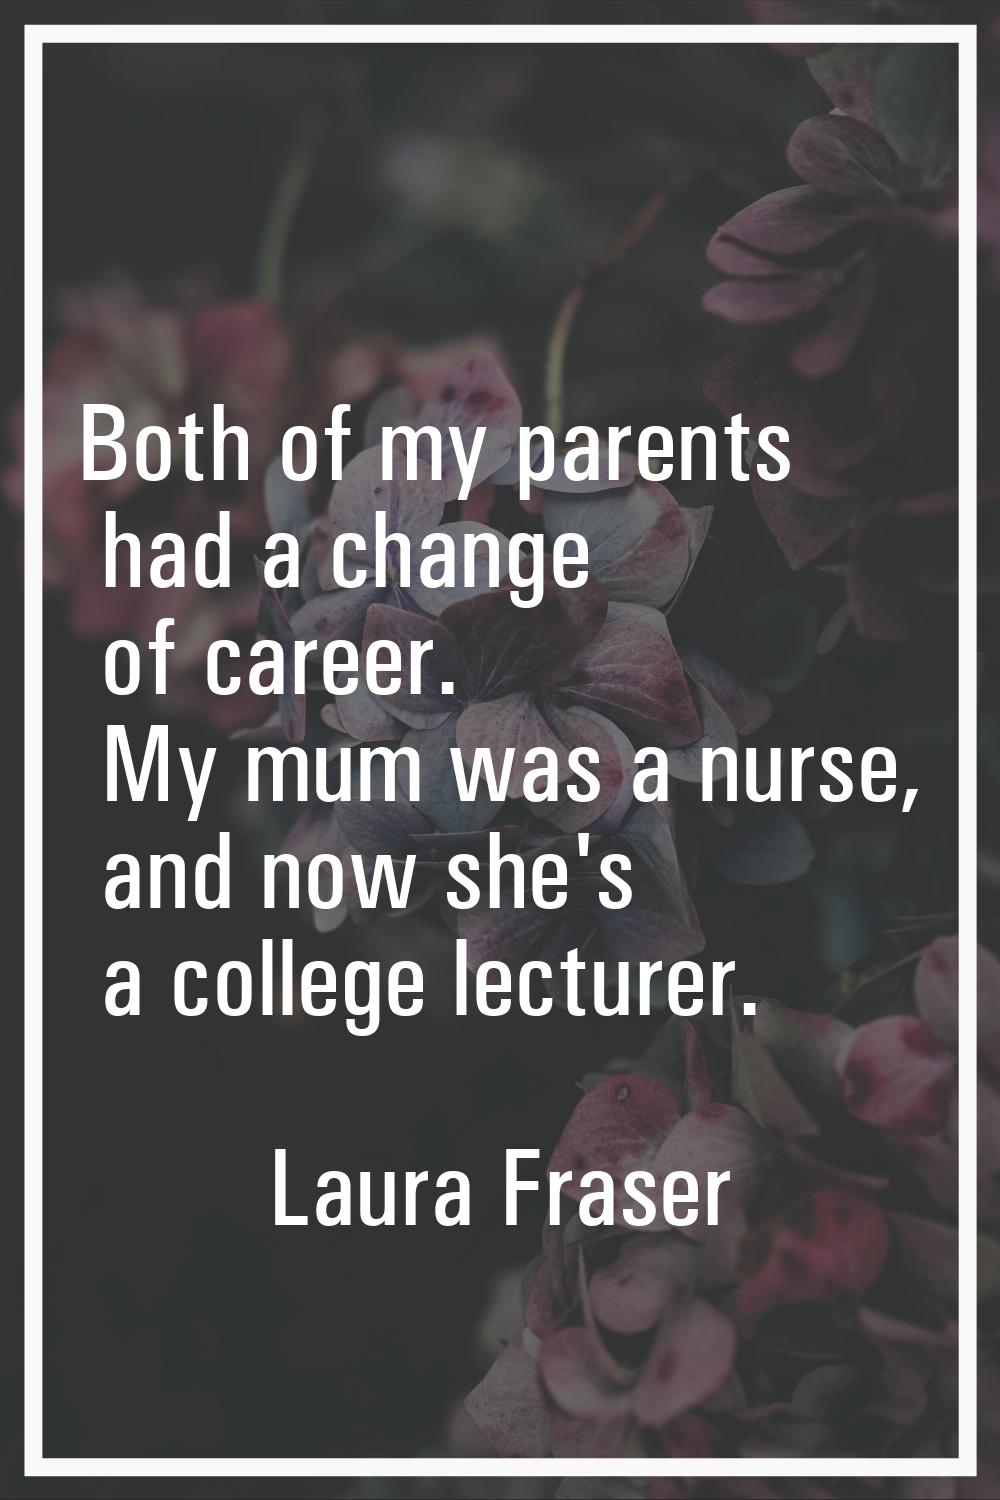 Both of my parents had a change of career. My mum was a nurse, and now she's a college lecturer.